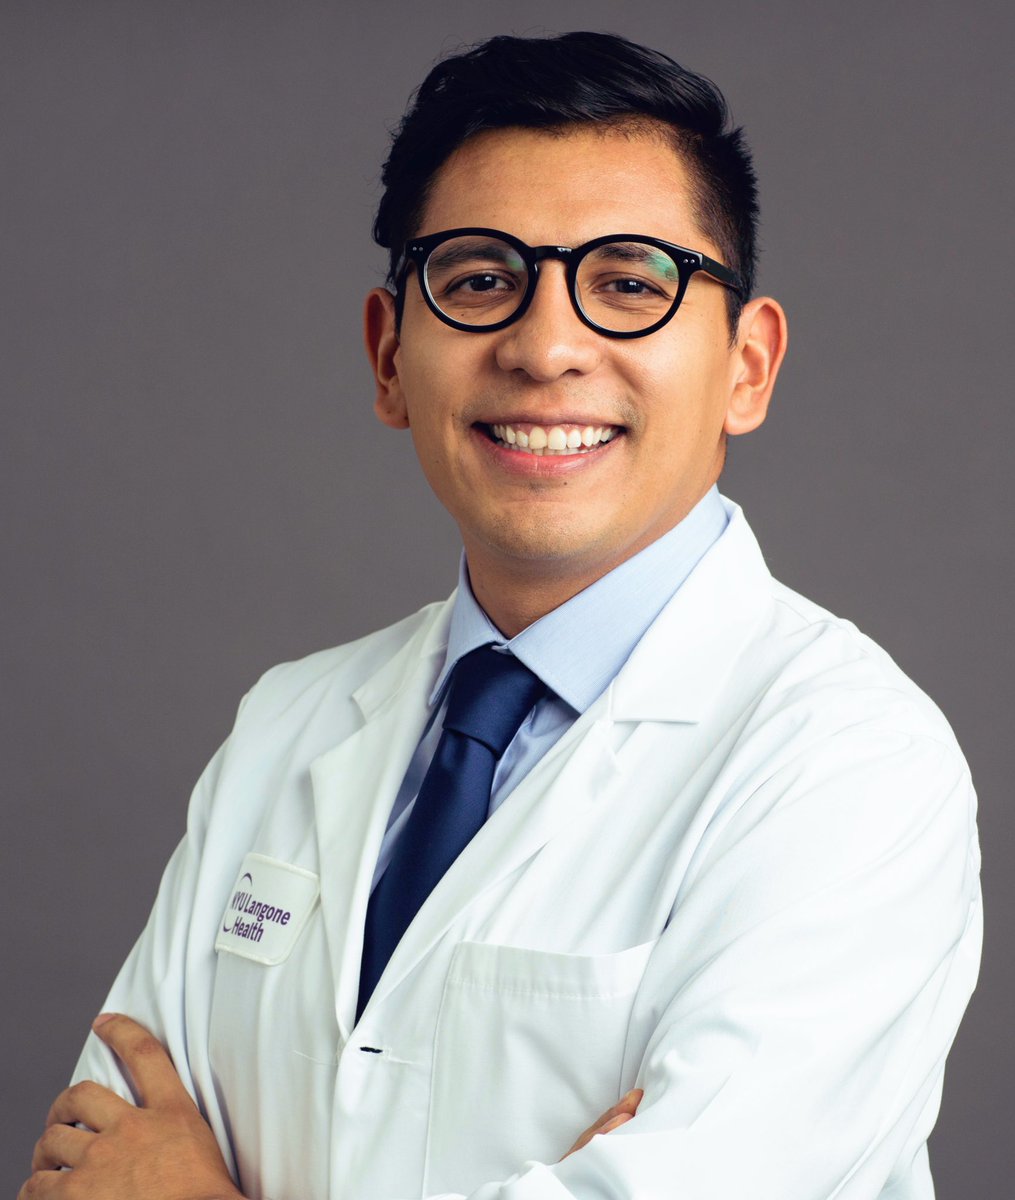 In today’s #MeetOurResidents PGY-4 & former chief resident Manuel Gutierrez Amezcua, MD. Proud Mexican 🇲🇽 and CDMX native, @PathIsArt joined @NYUGSOM_Path via @FacMedicinaUNAM and will head to @MSKPathology for Oncologic Surgical Pathology & #cytopath fellowships after graduation